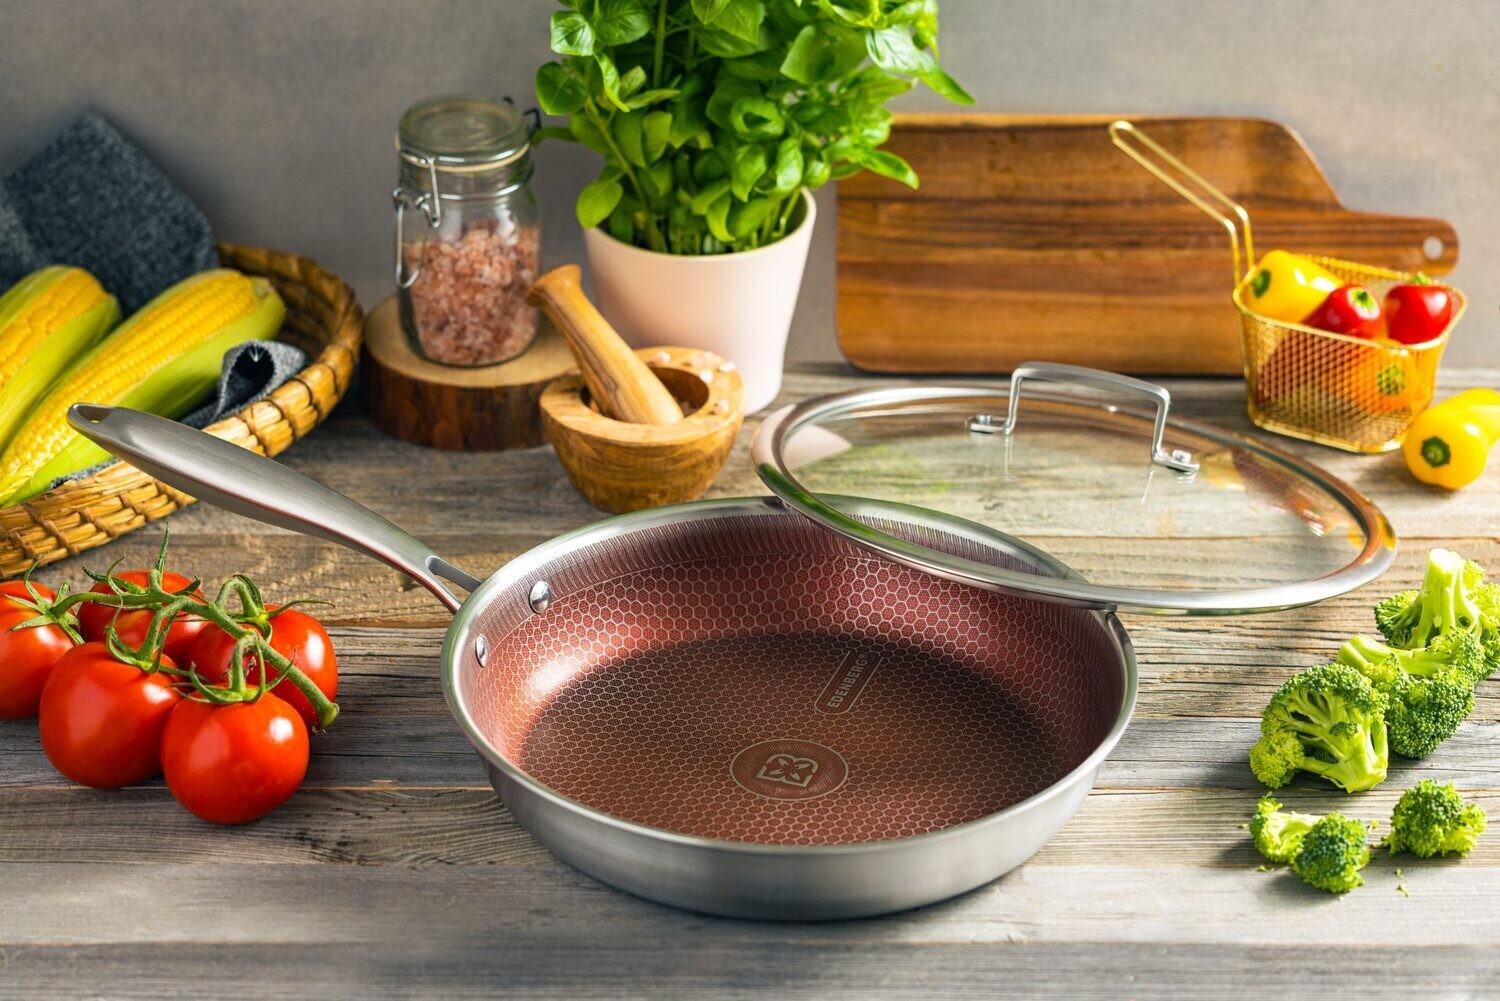 Edenberg Deep Fry Pan 24cm Tri-Ply Stainless Steel induction friendly Cookware EB-14154 SUS-304/SUS430